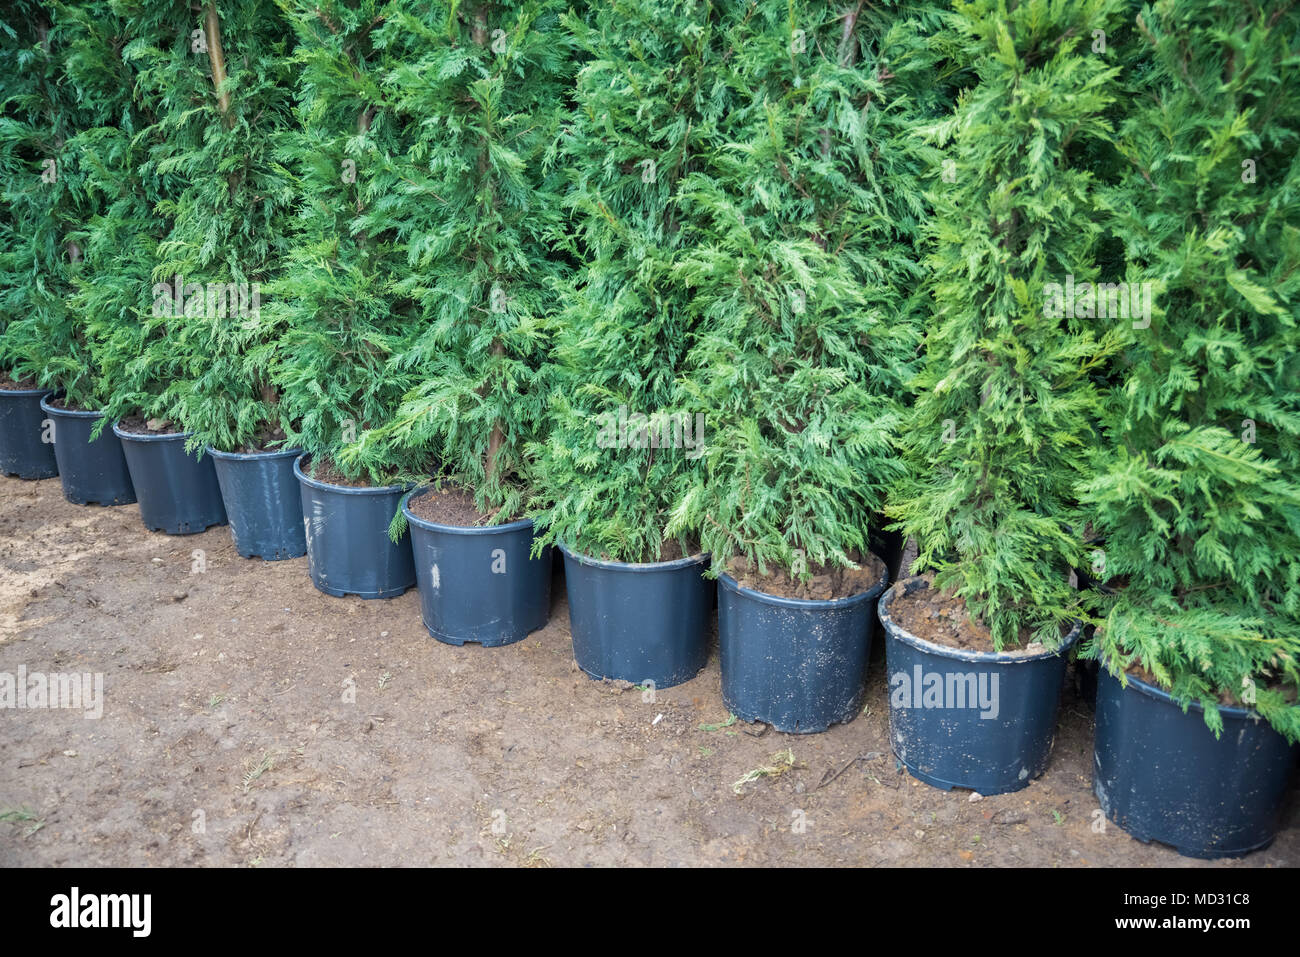 Many Green Hedge of Thuja Trees, or Green hedge of the Tui trees in plastic box for sale Stock Photo